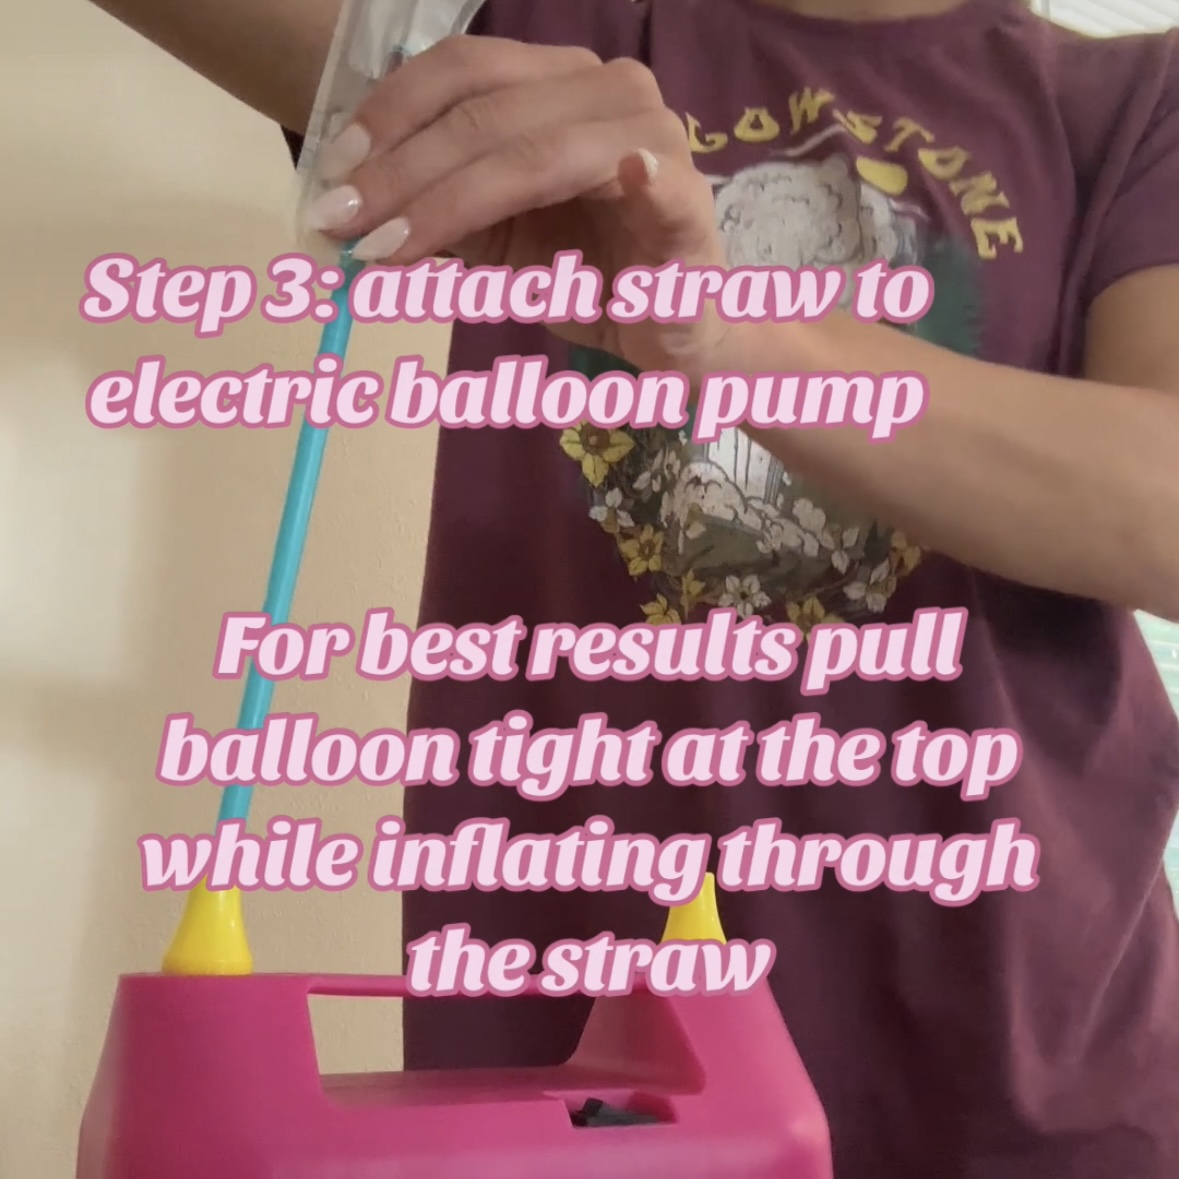 Best results to inflate a balloon with a valve- pull it tight while the straw is connected to the balloon pump